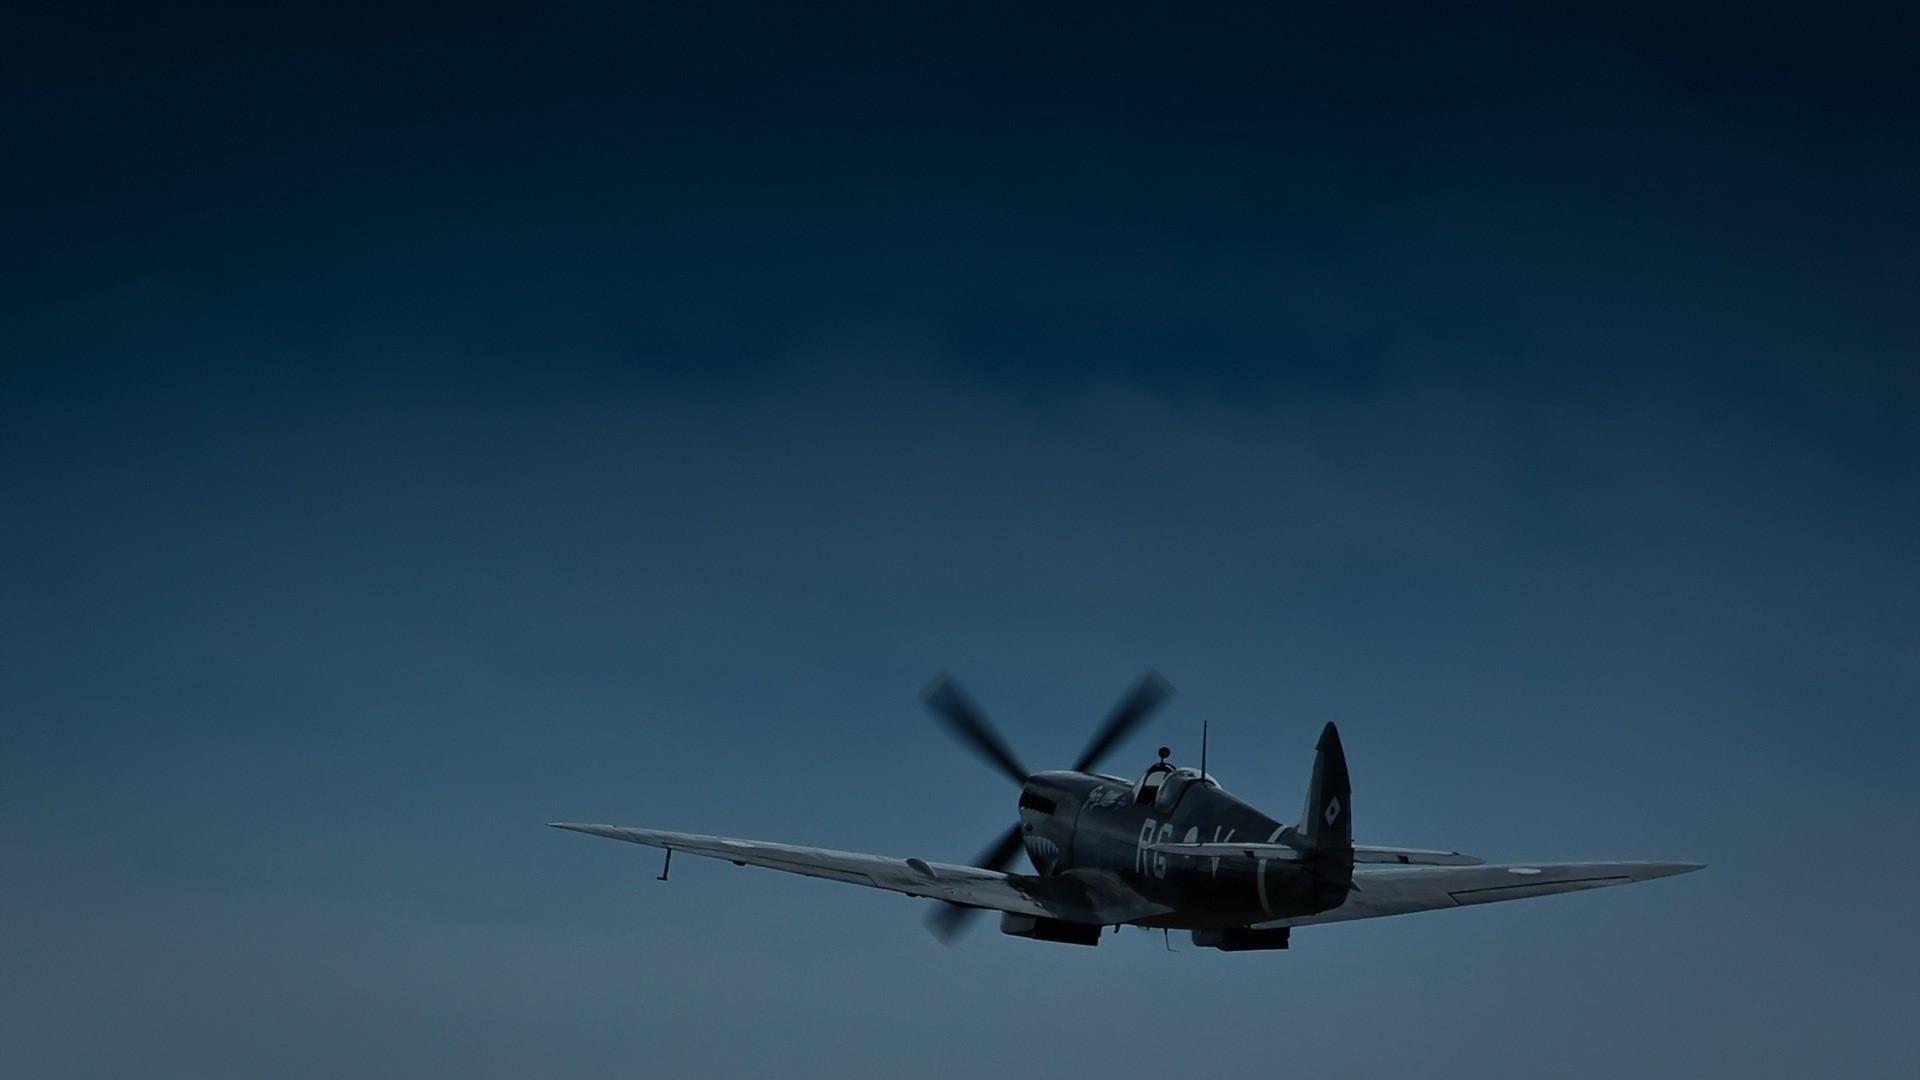 Aircraft aviation supermarine spitfire twilight time of day